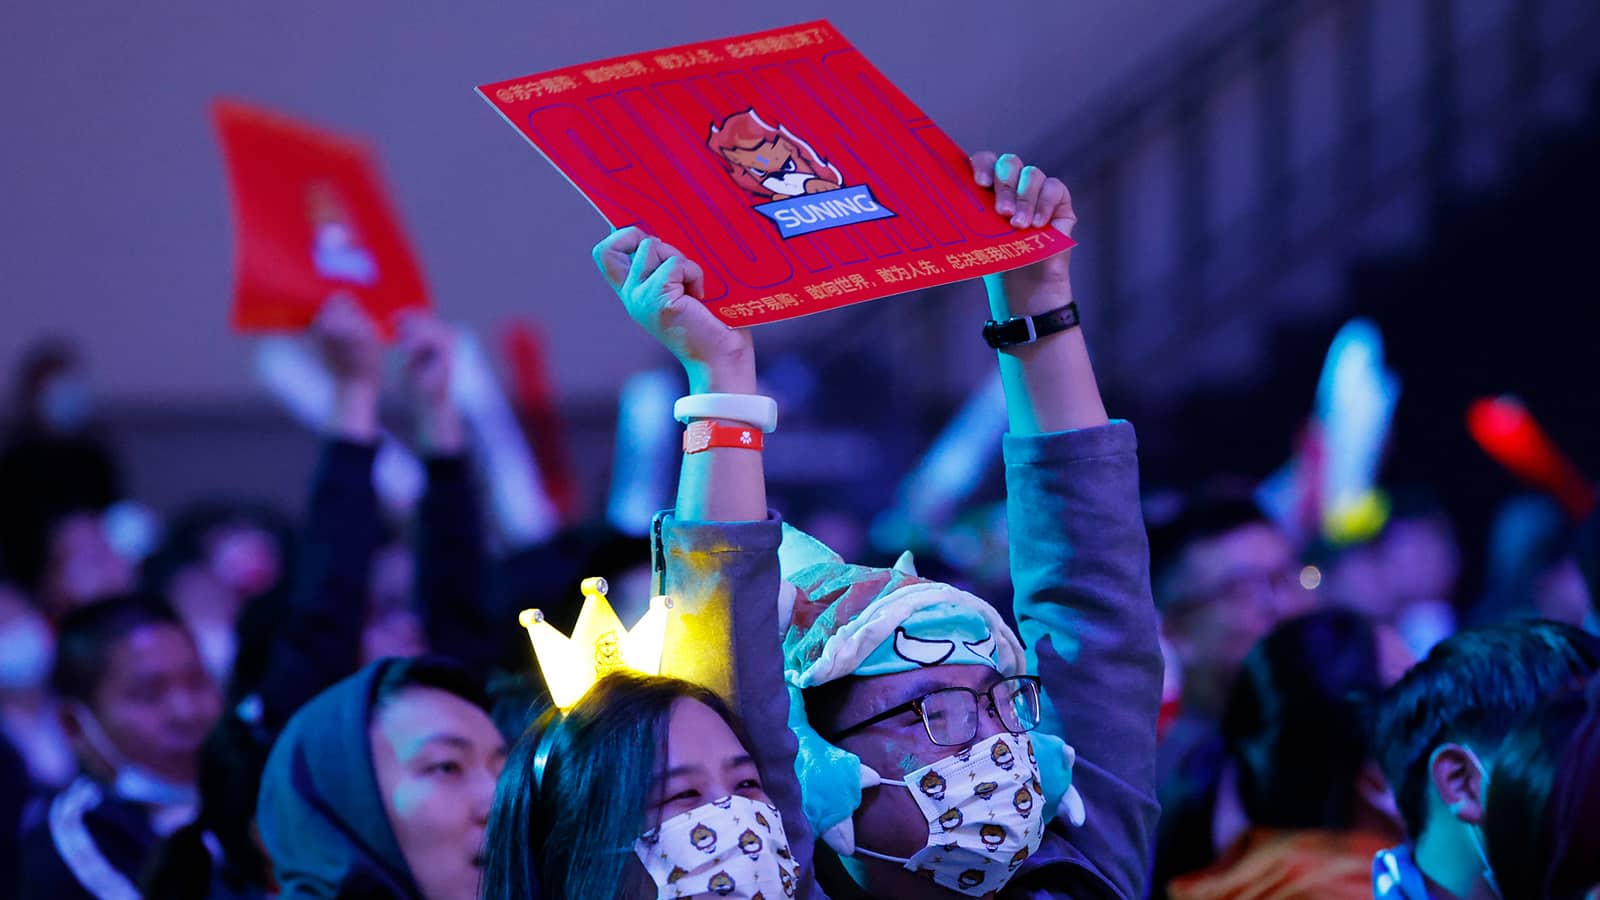 Suning fan holding sign at League of Legends World Championship 2021